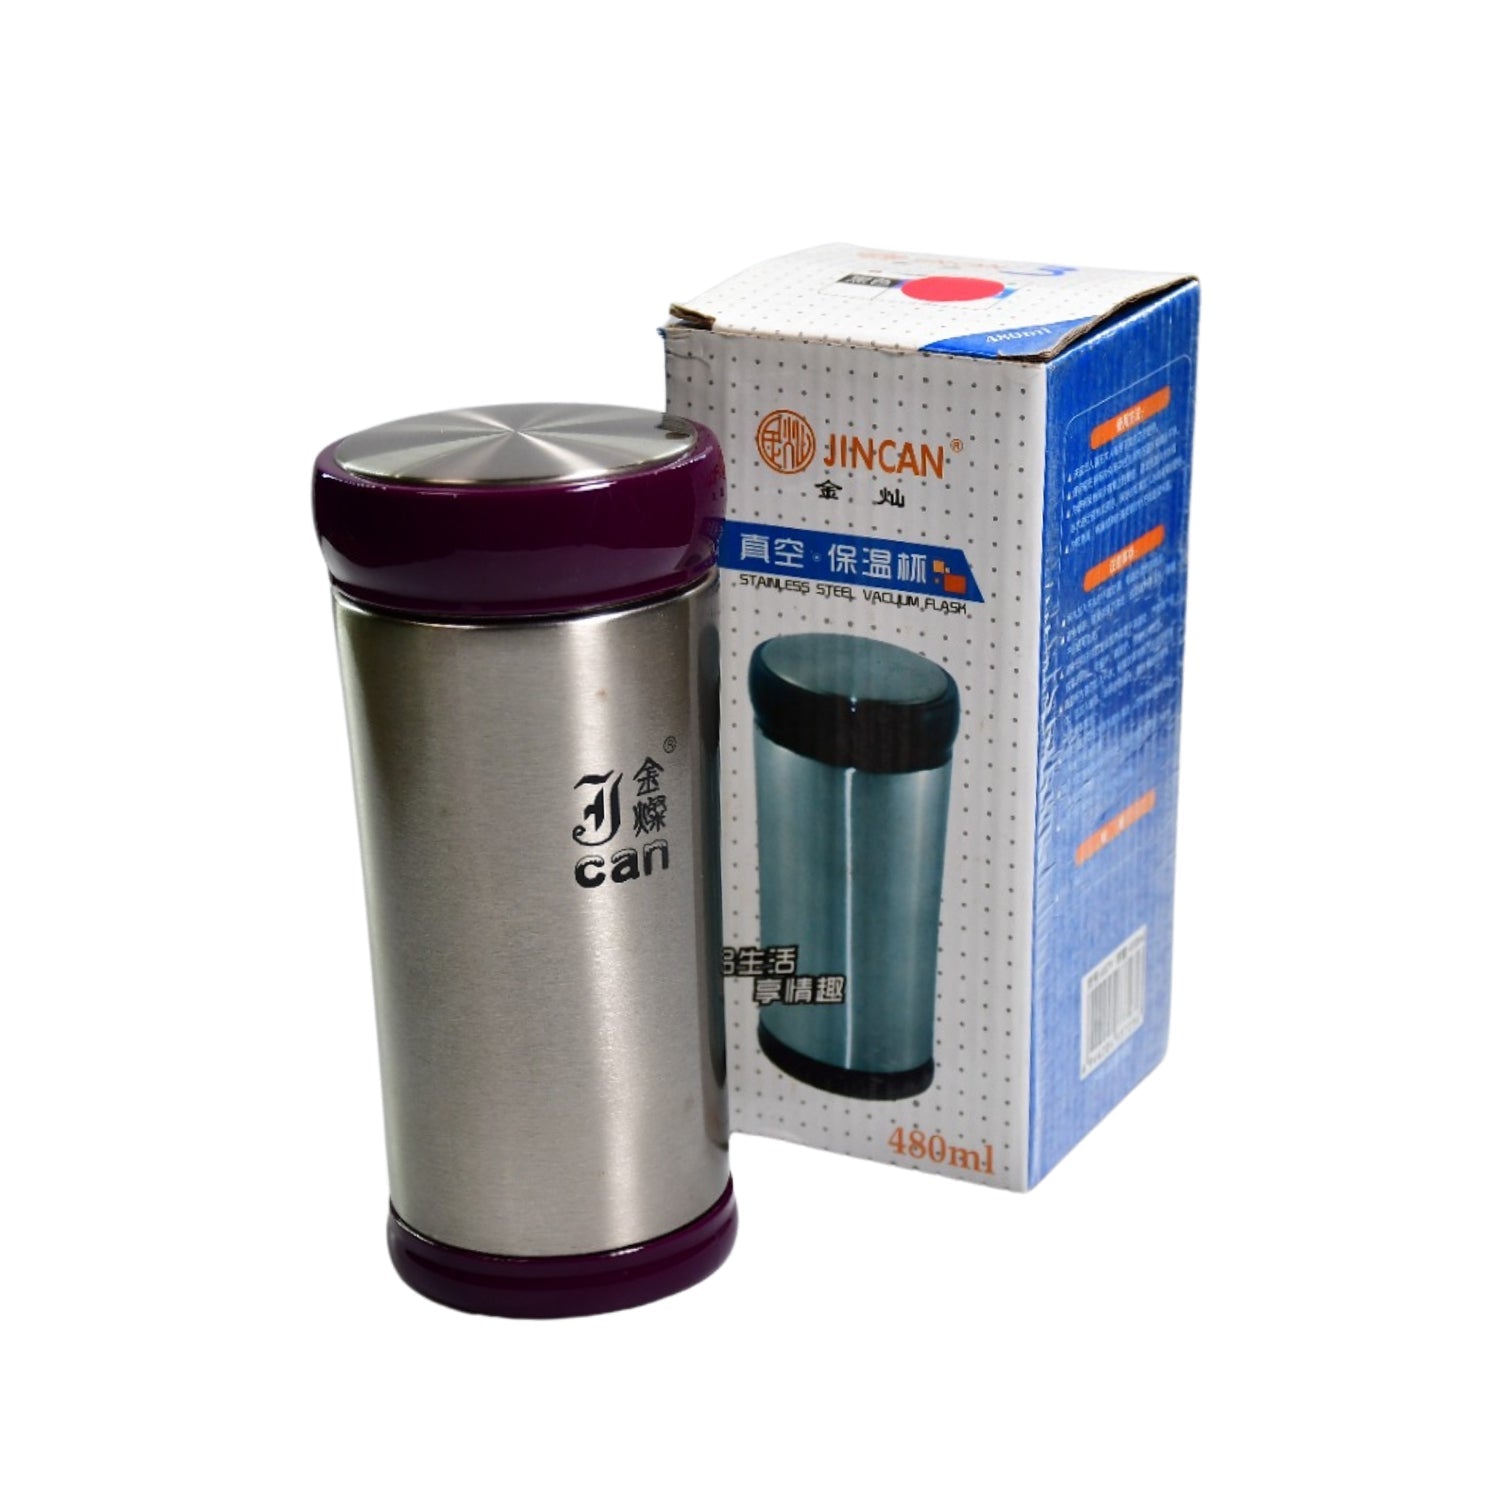 6457 480ML PLAIN PRINT STAINLESS STEEL WATER BOTTLE FOR OFFICE, HOME, GYM, OUTDOOR TRAVEL HOT AND COLD DRINKS. 